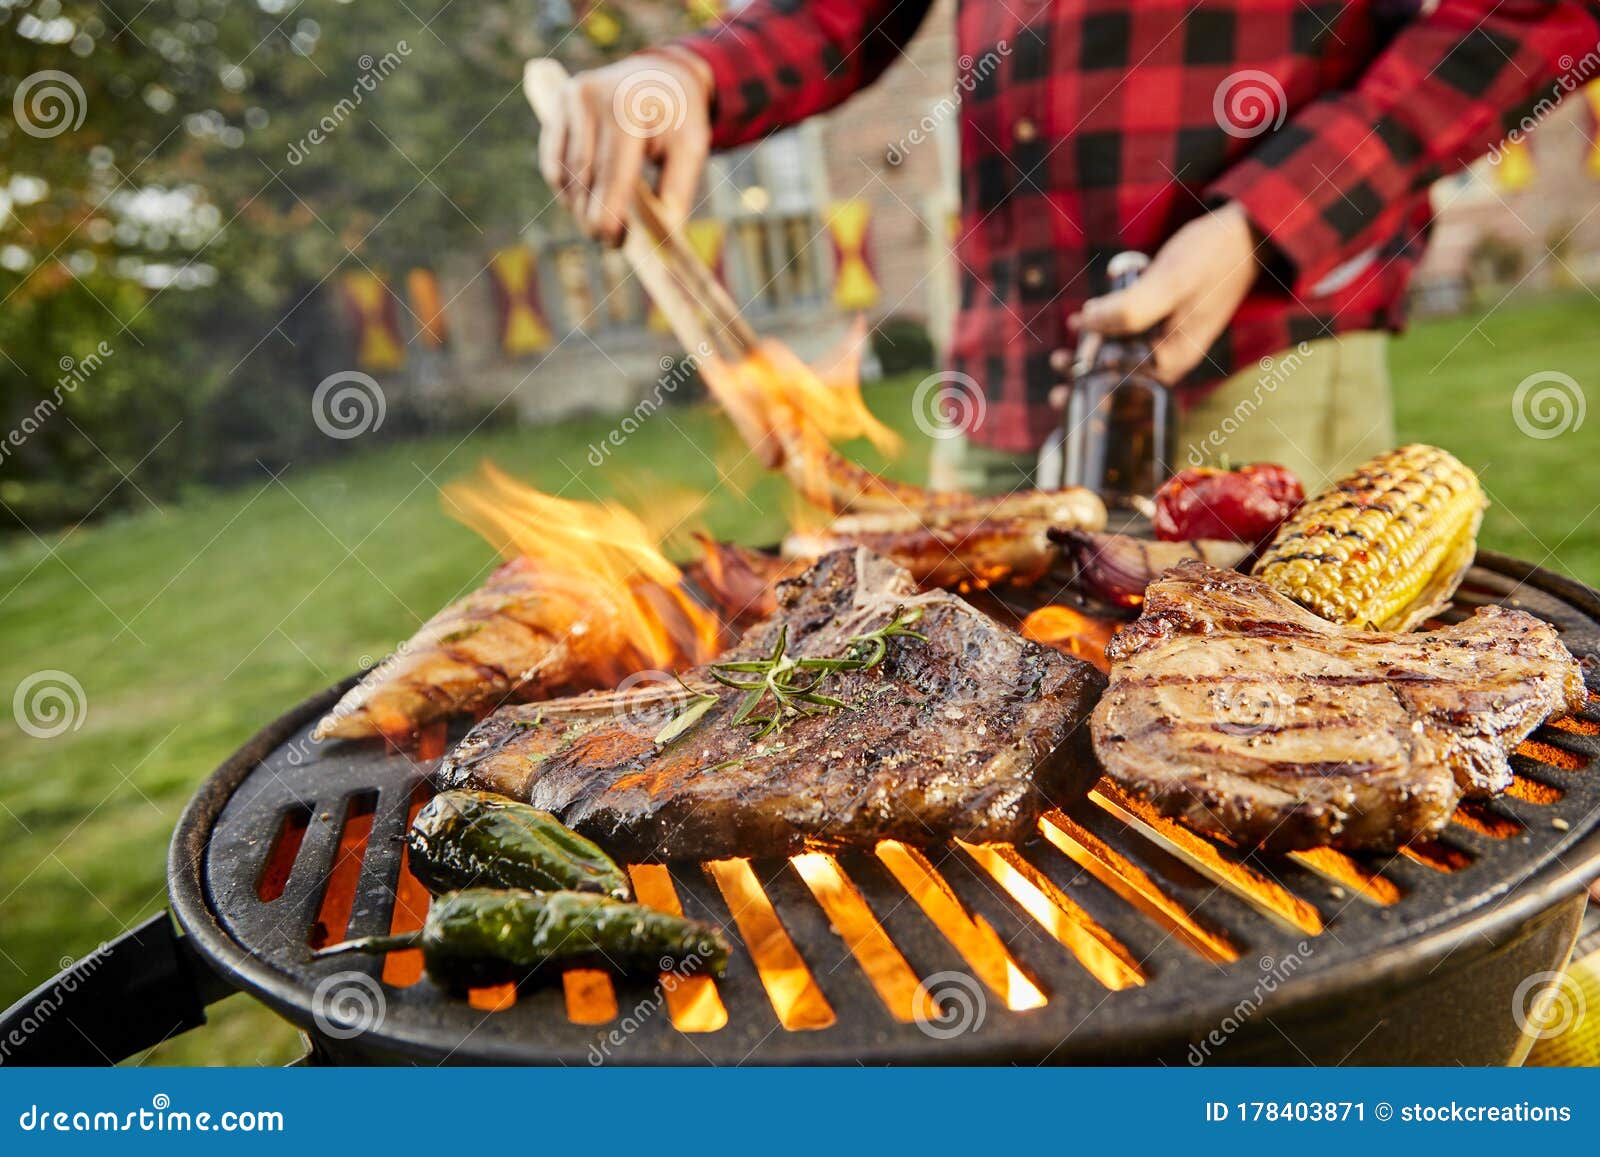 man holding a beer grilling meat on a bbq